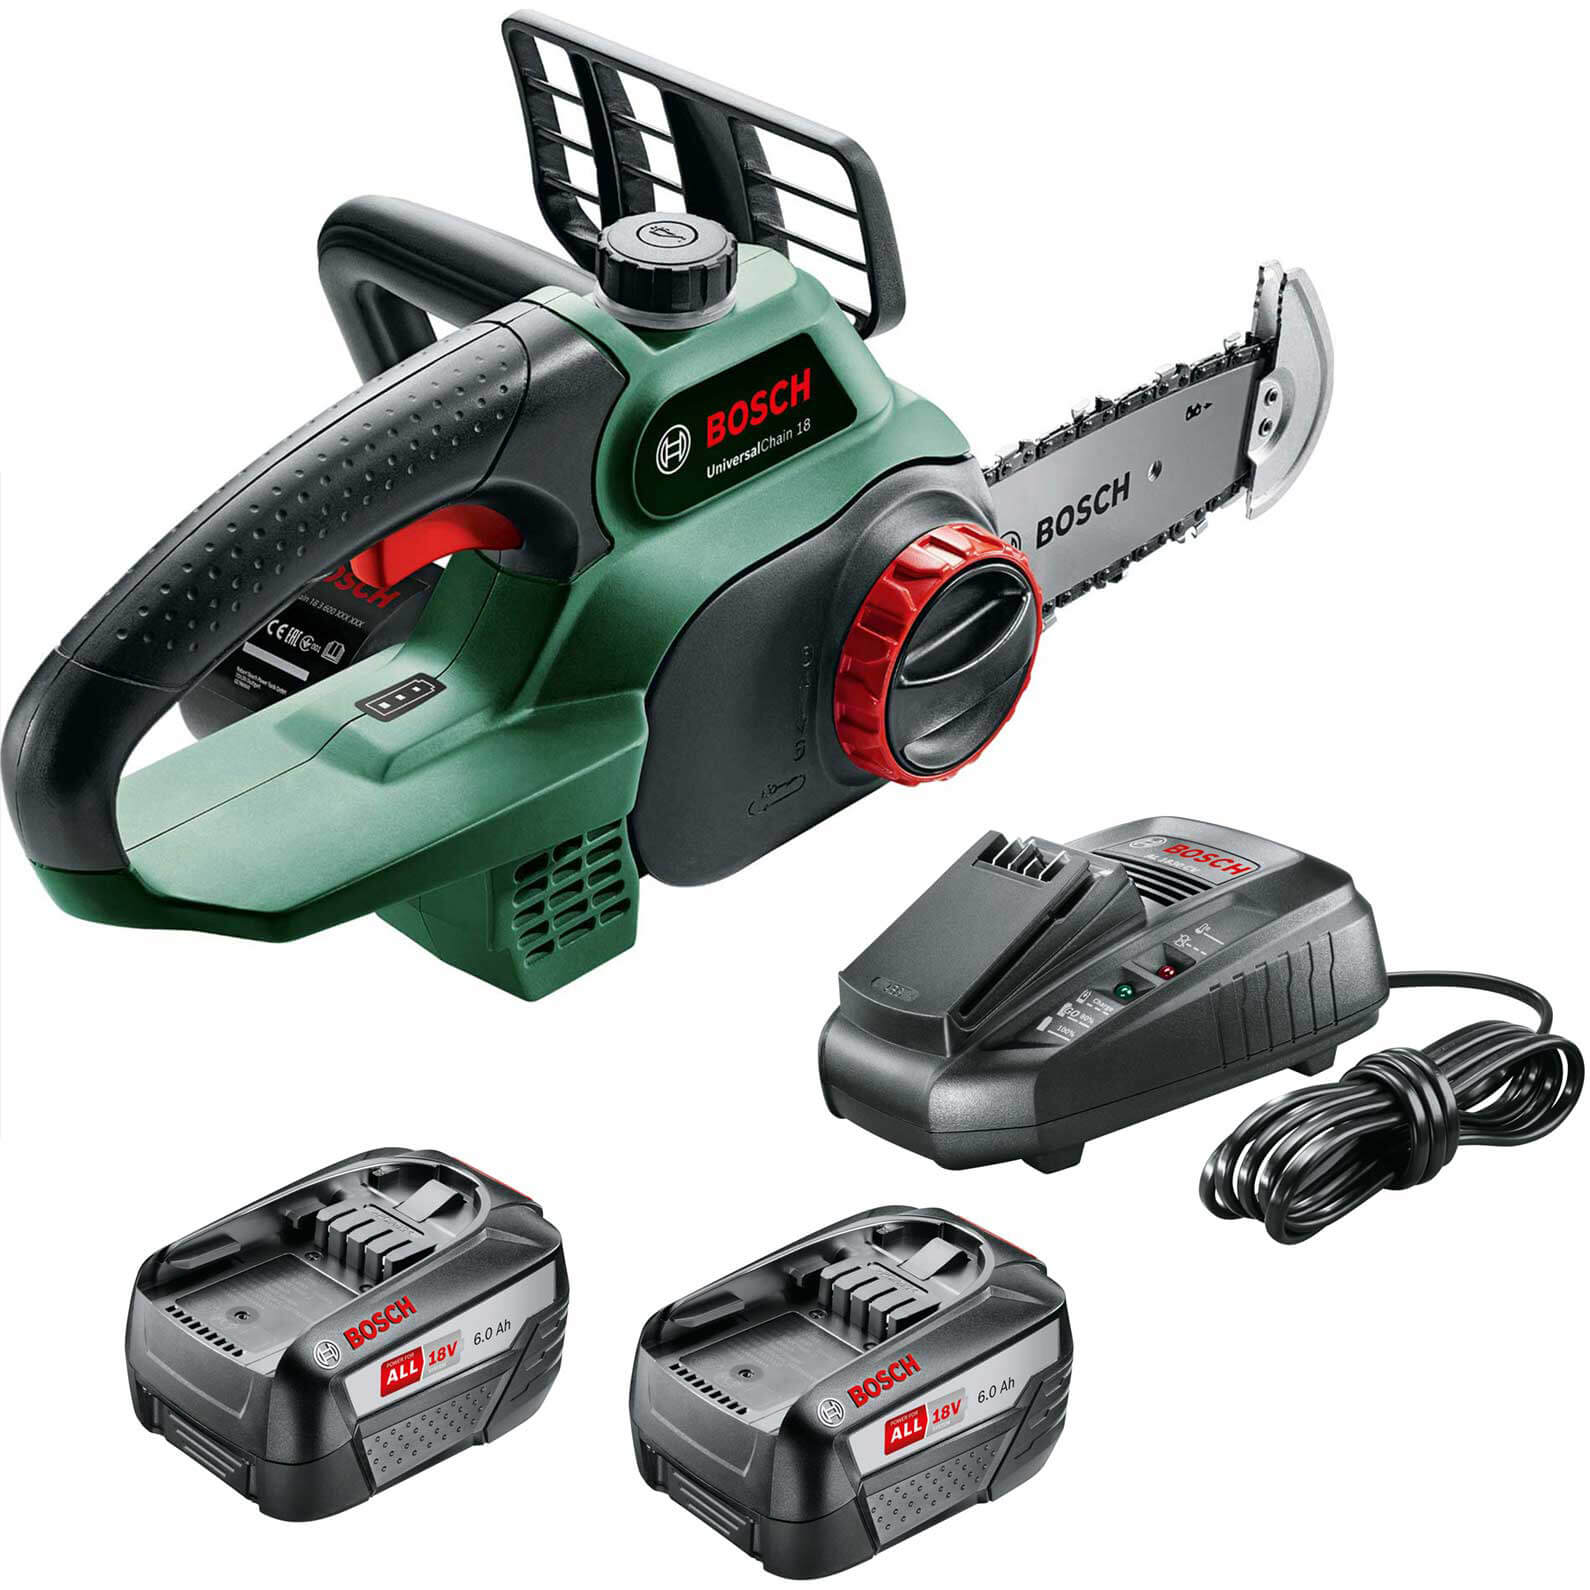 Image of Bosch UNIVERSALCHAIN 18v Cordless Chainsaw 200mm 2 x 6ah Li-ion Charger